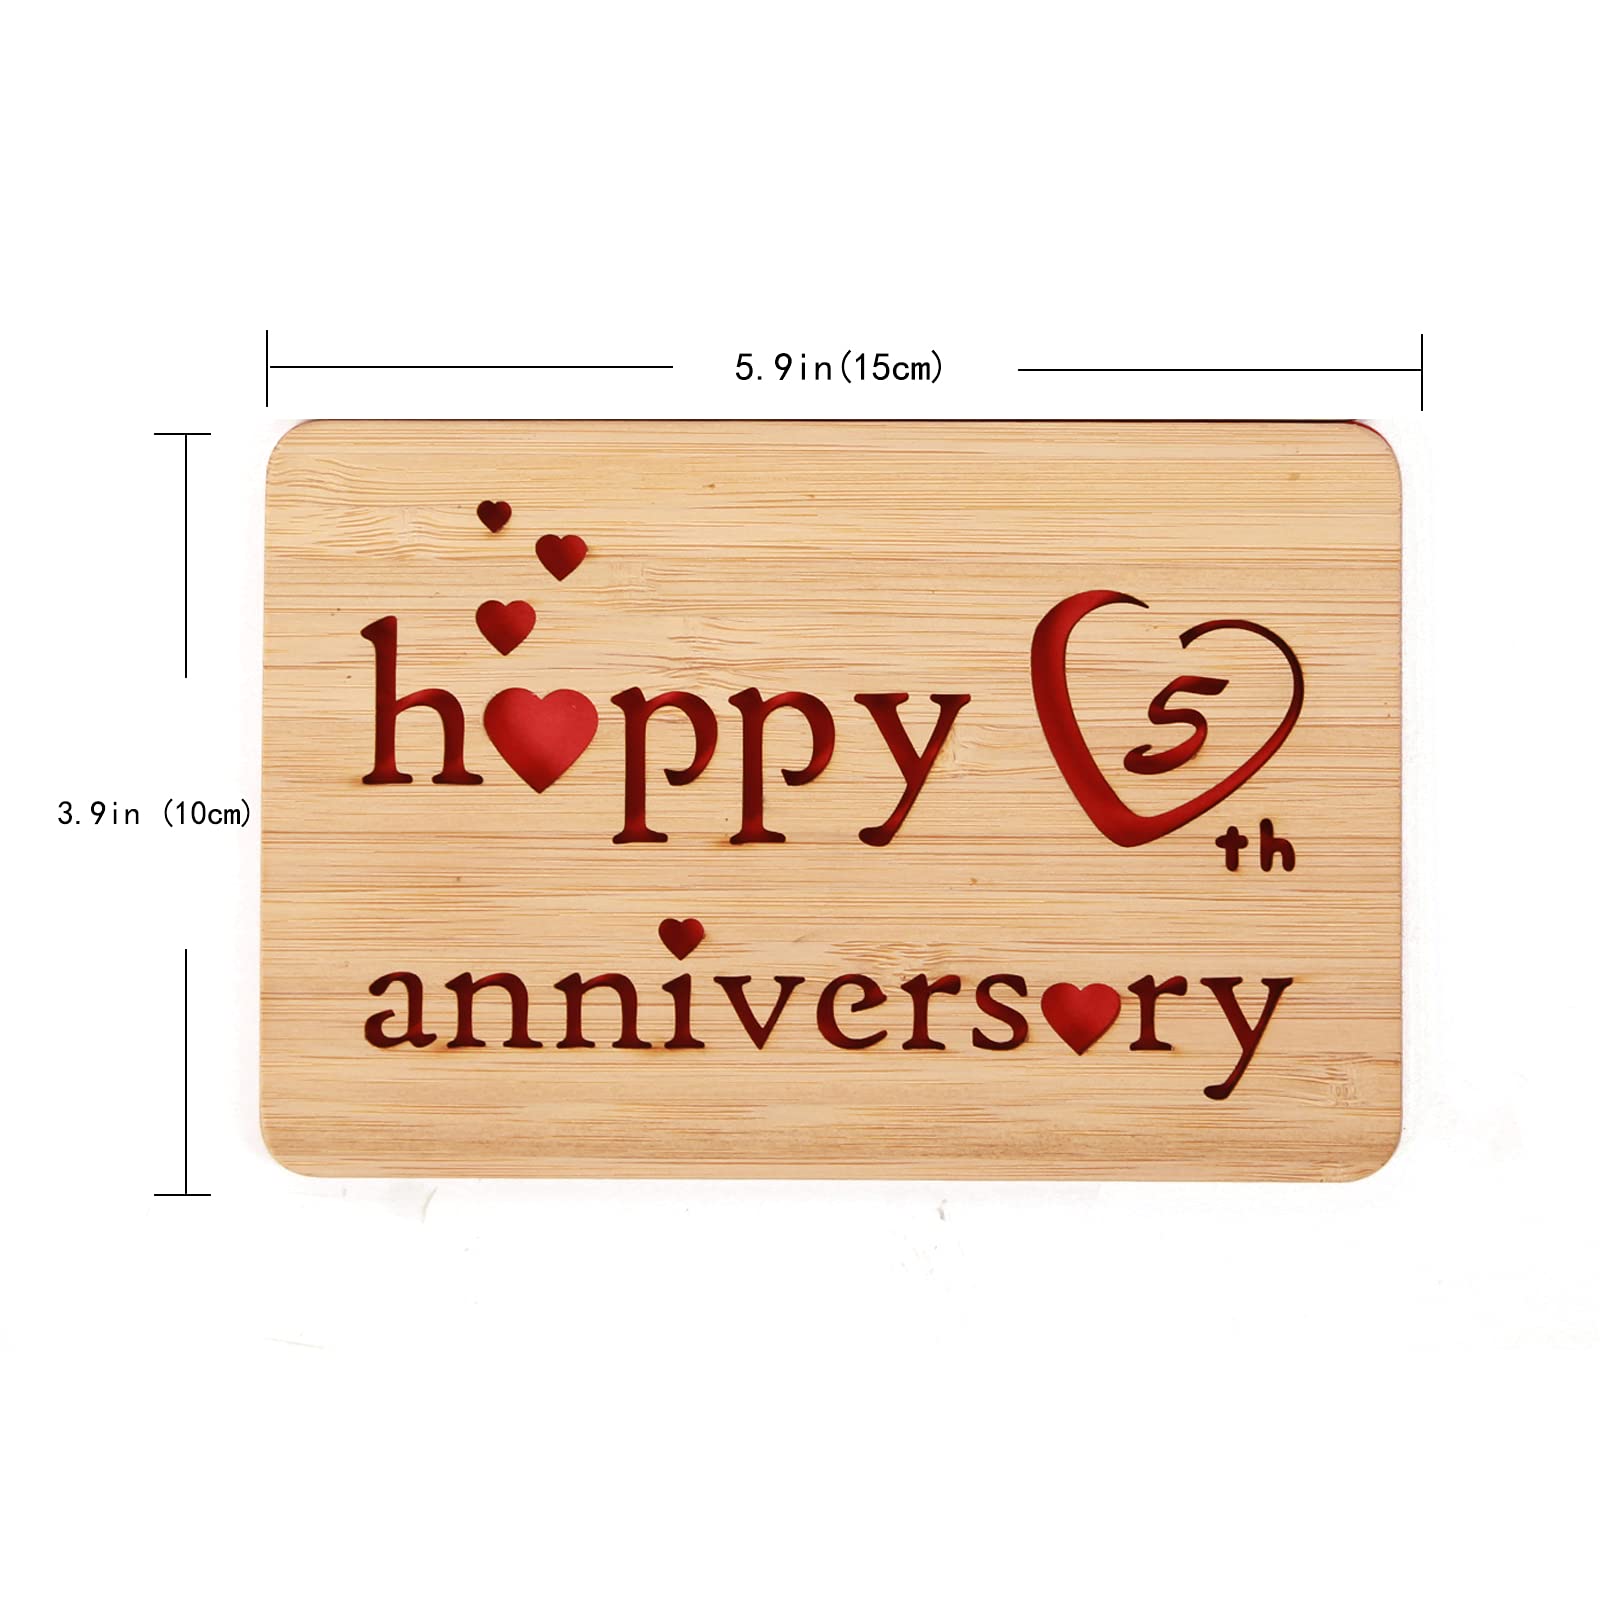 5th Wedding Anniversary Wood Gifts,Handmade With Real Bamboo Wooden Greeting Cards for Couple,5 Year Anniversary Card for Wife,Husband,Him or Her